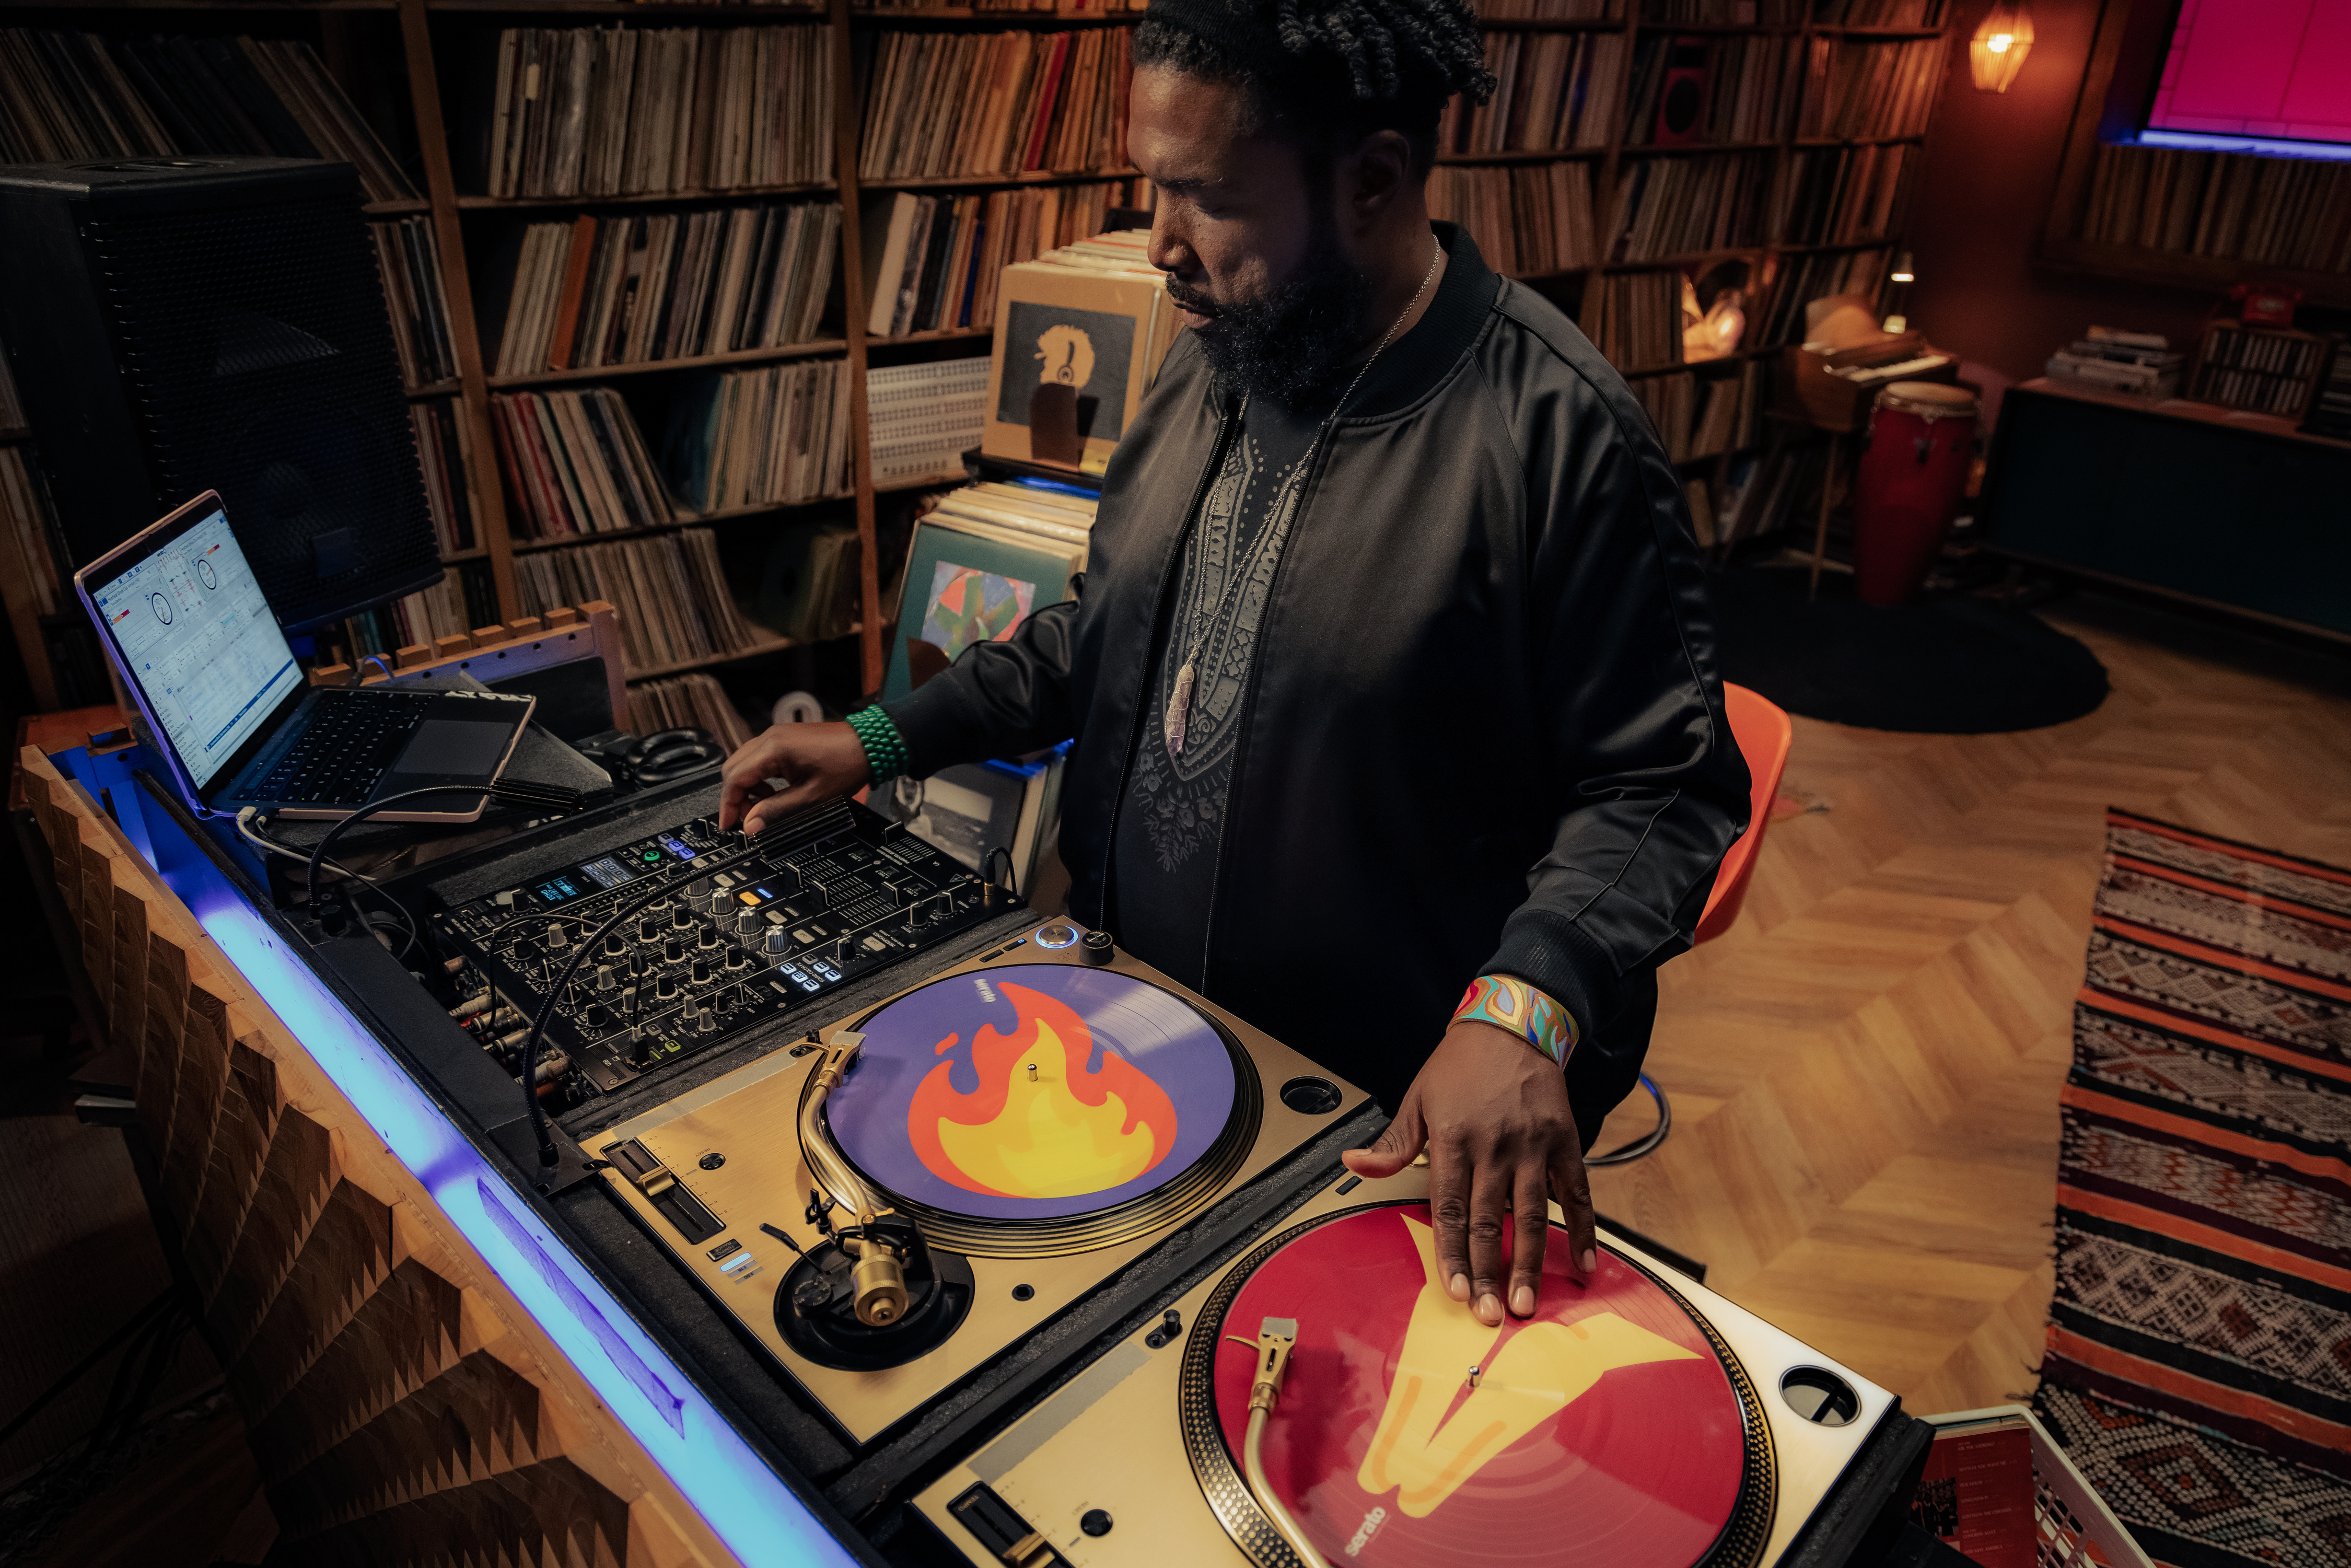 Questlove teaches MasterClass in DJing and music curation